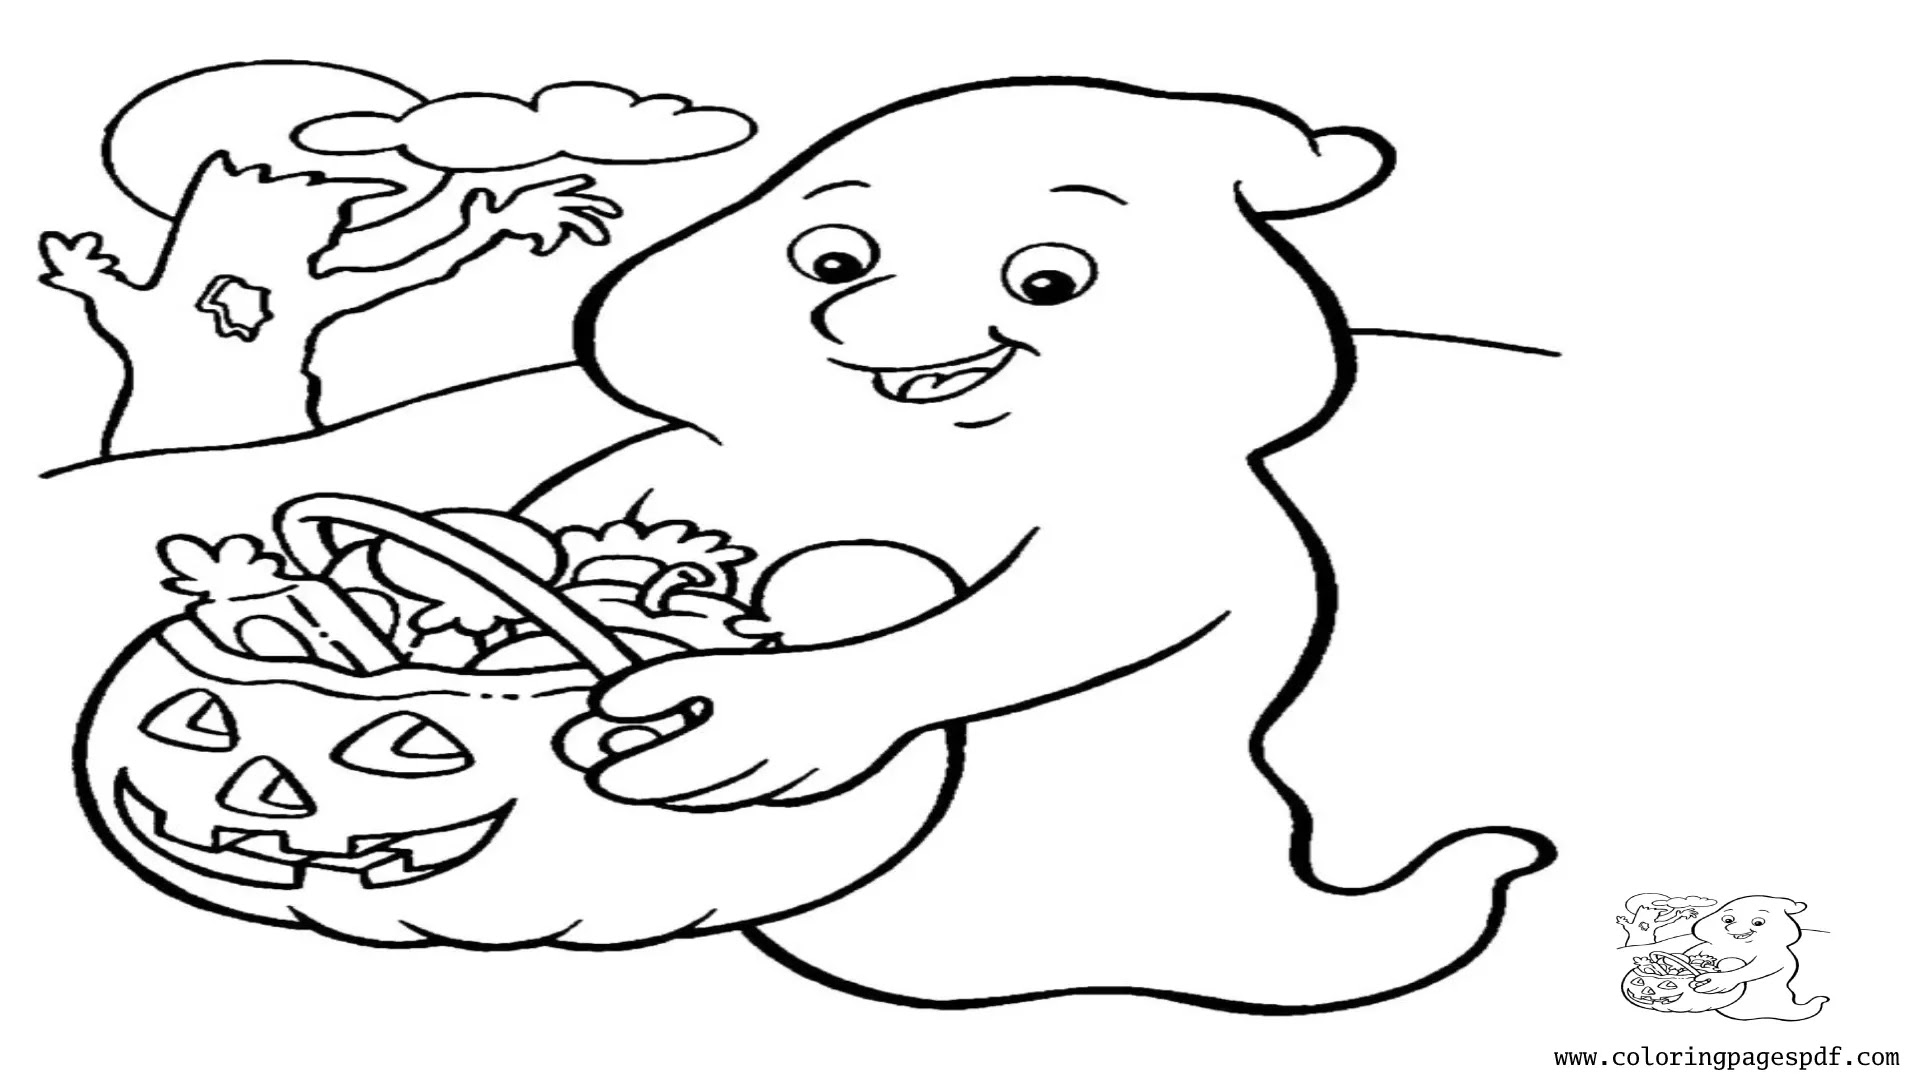 Coloring Page Of A Ghost Holding A Bucket Full Of Candy